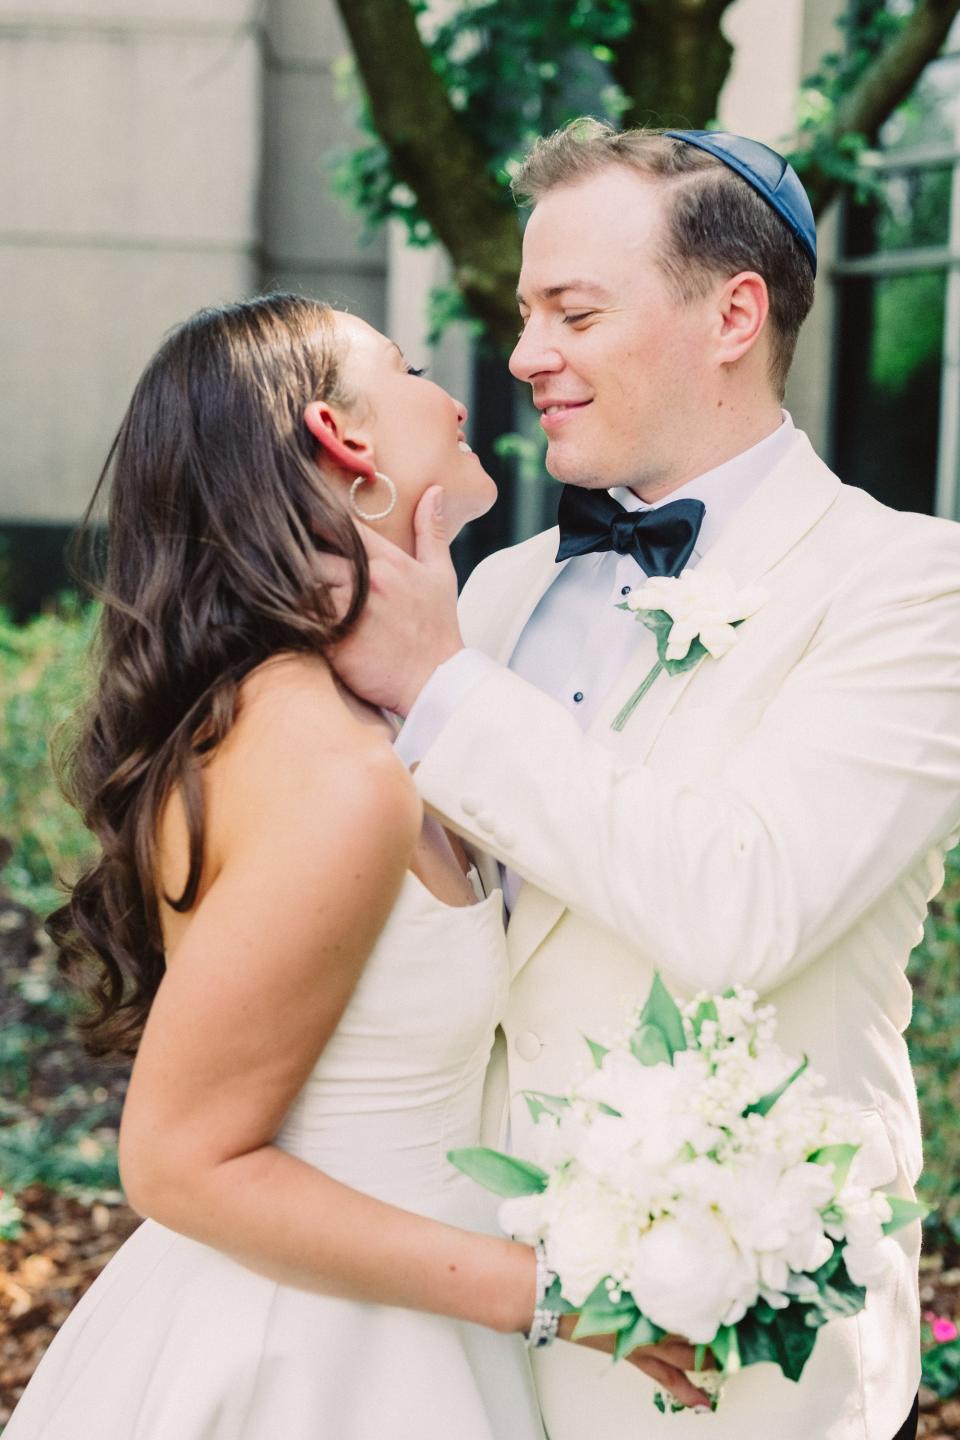 A groom holds his bride's face and smiles at her.